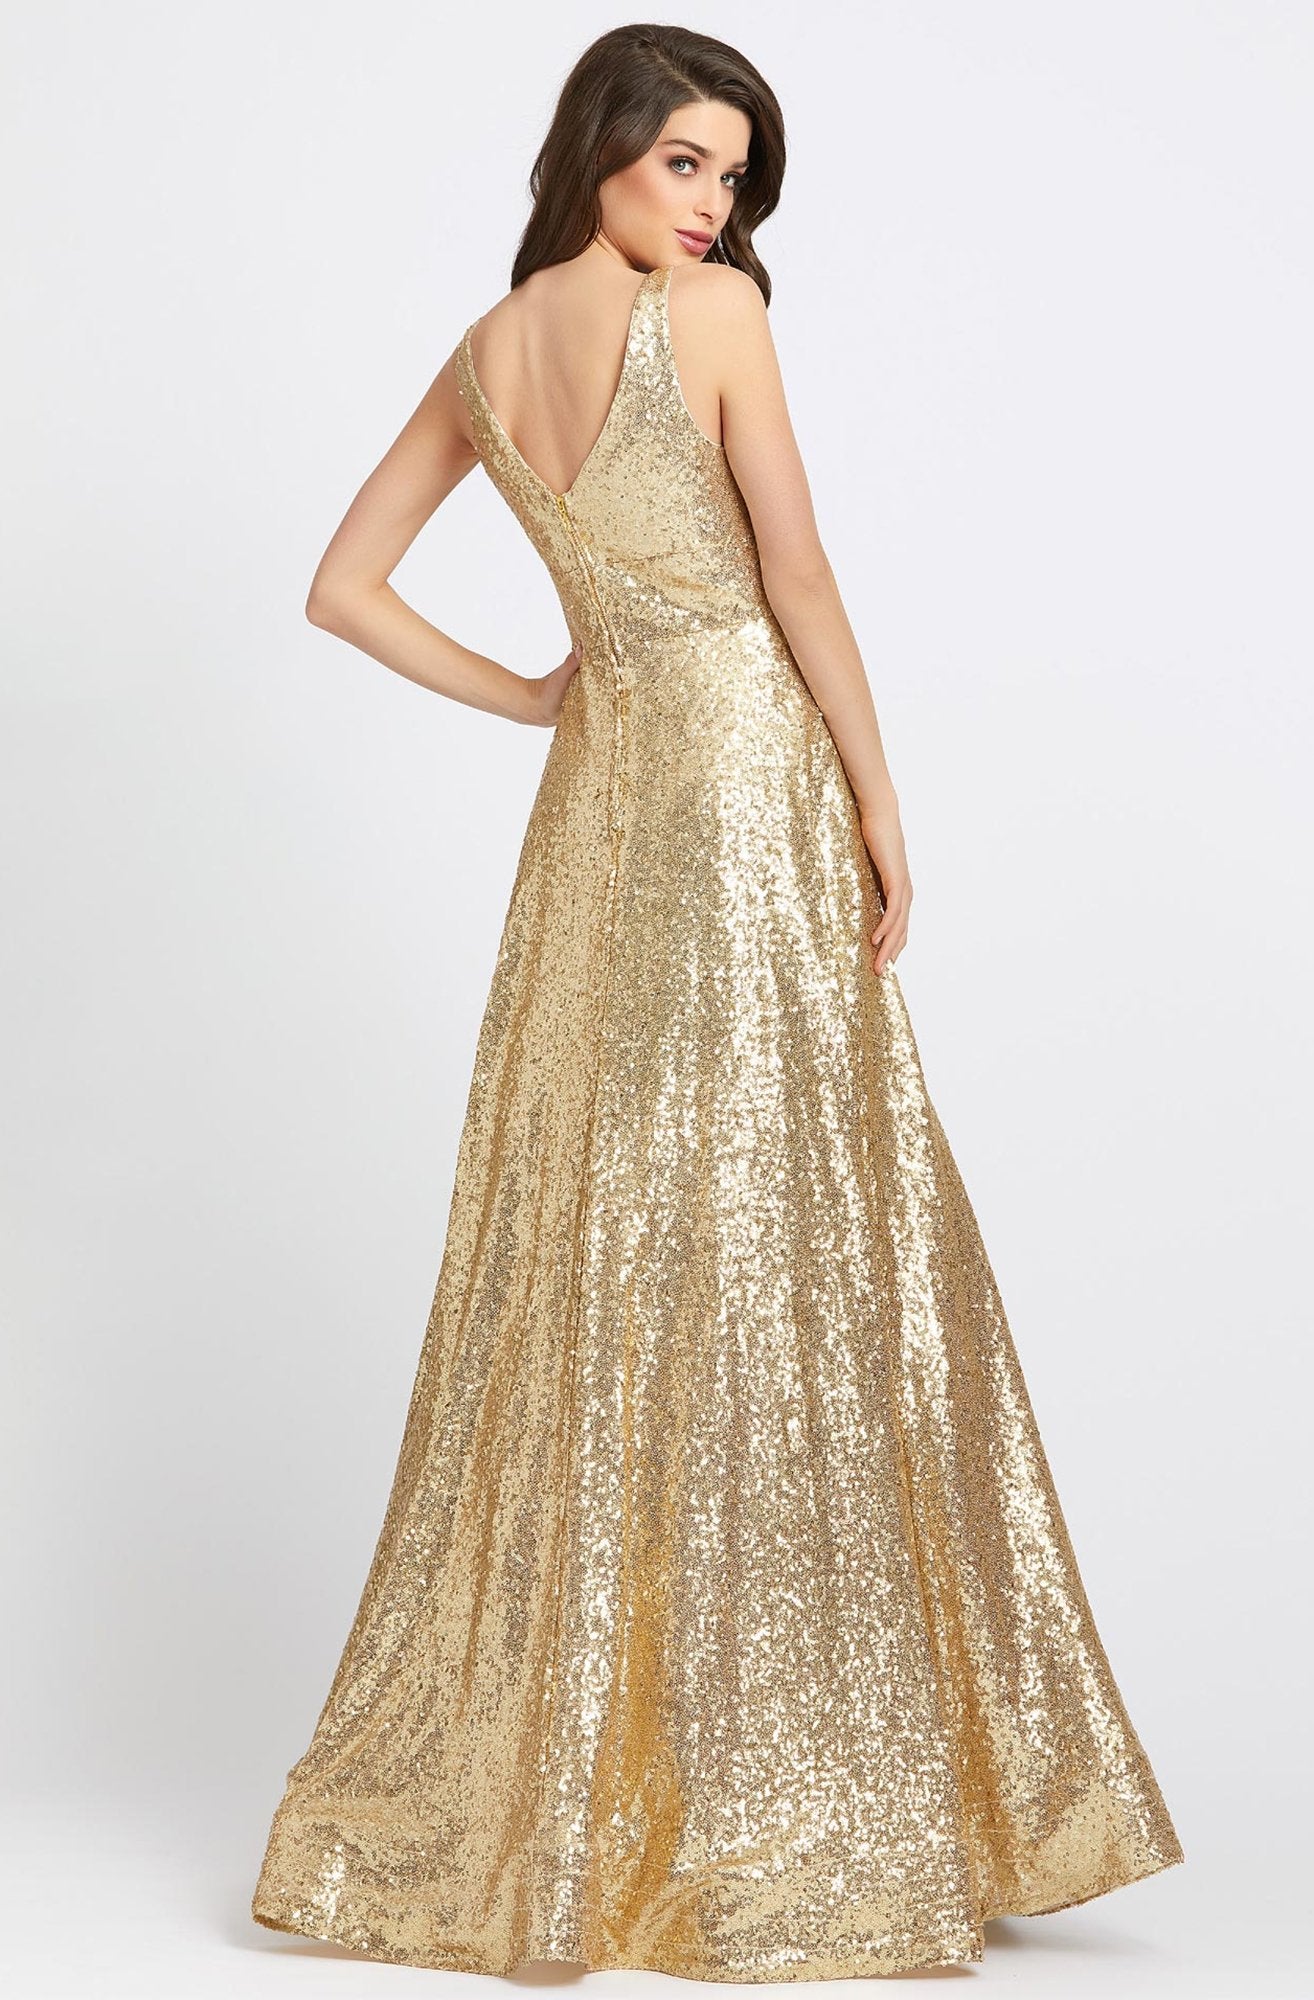 Ieena Duggal - 48798I Allover Sequin Sleeveless A Line Gown in Gold